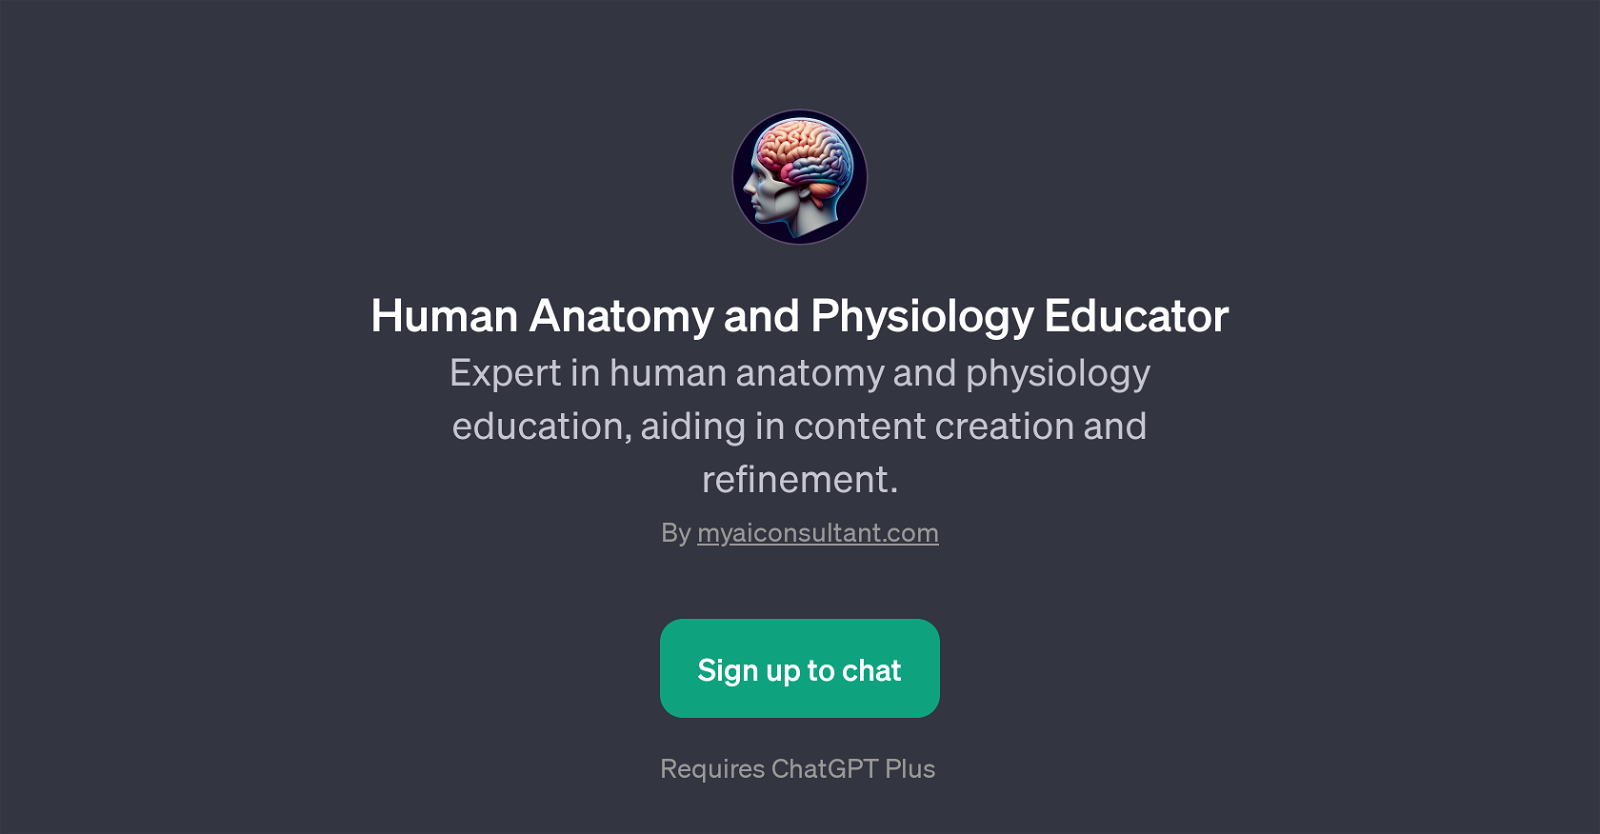 Human Anatomy and Physiology Educator website